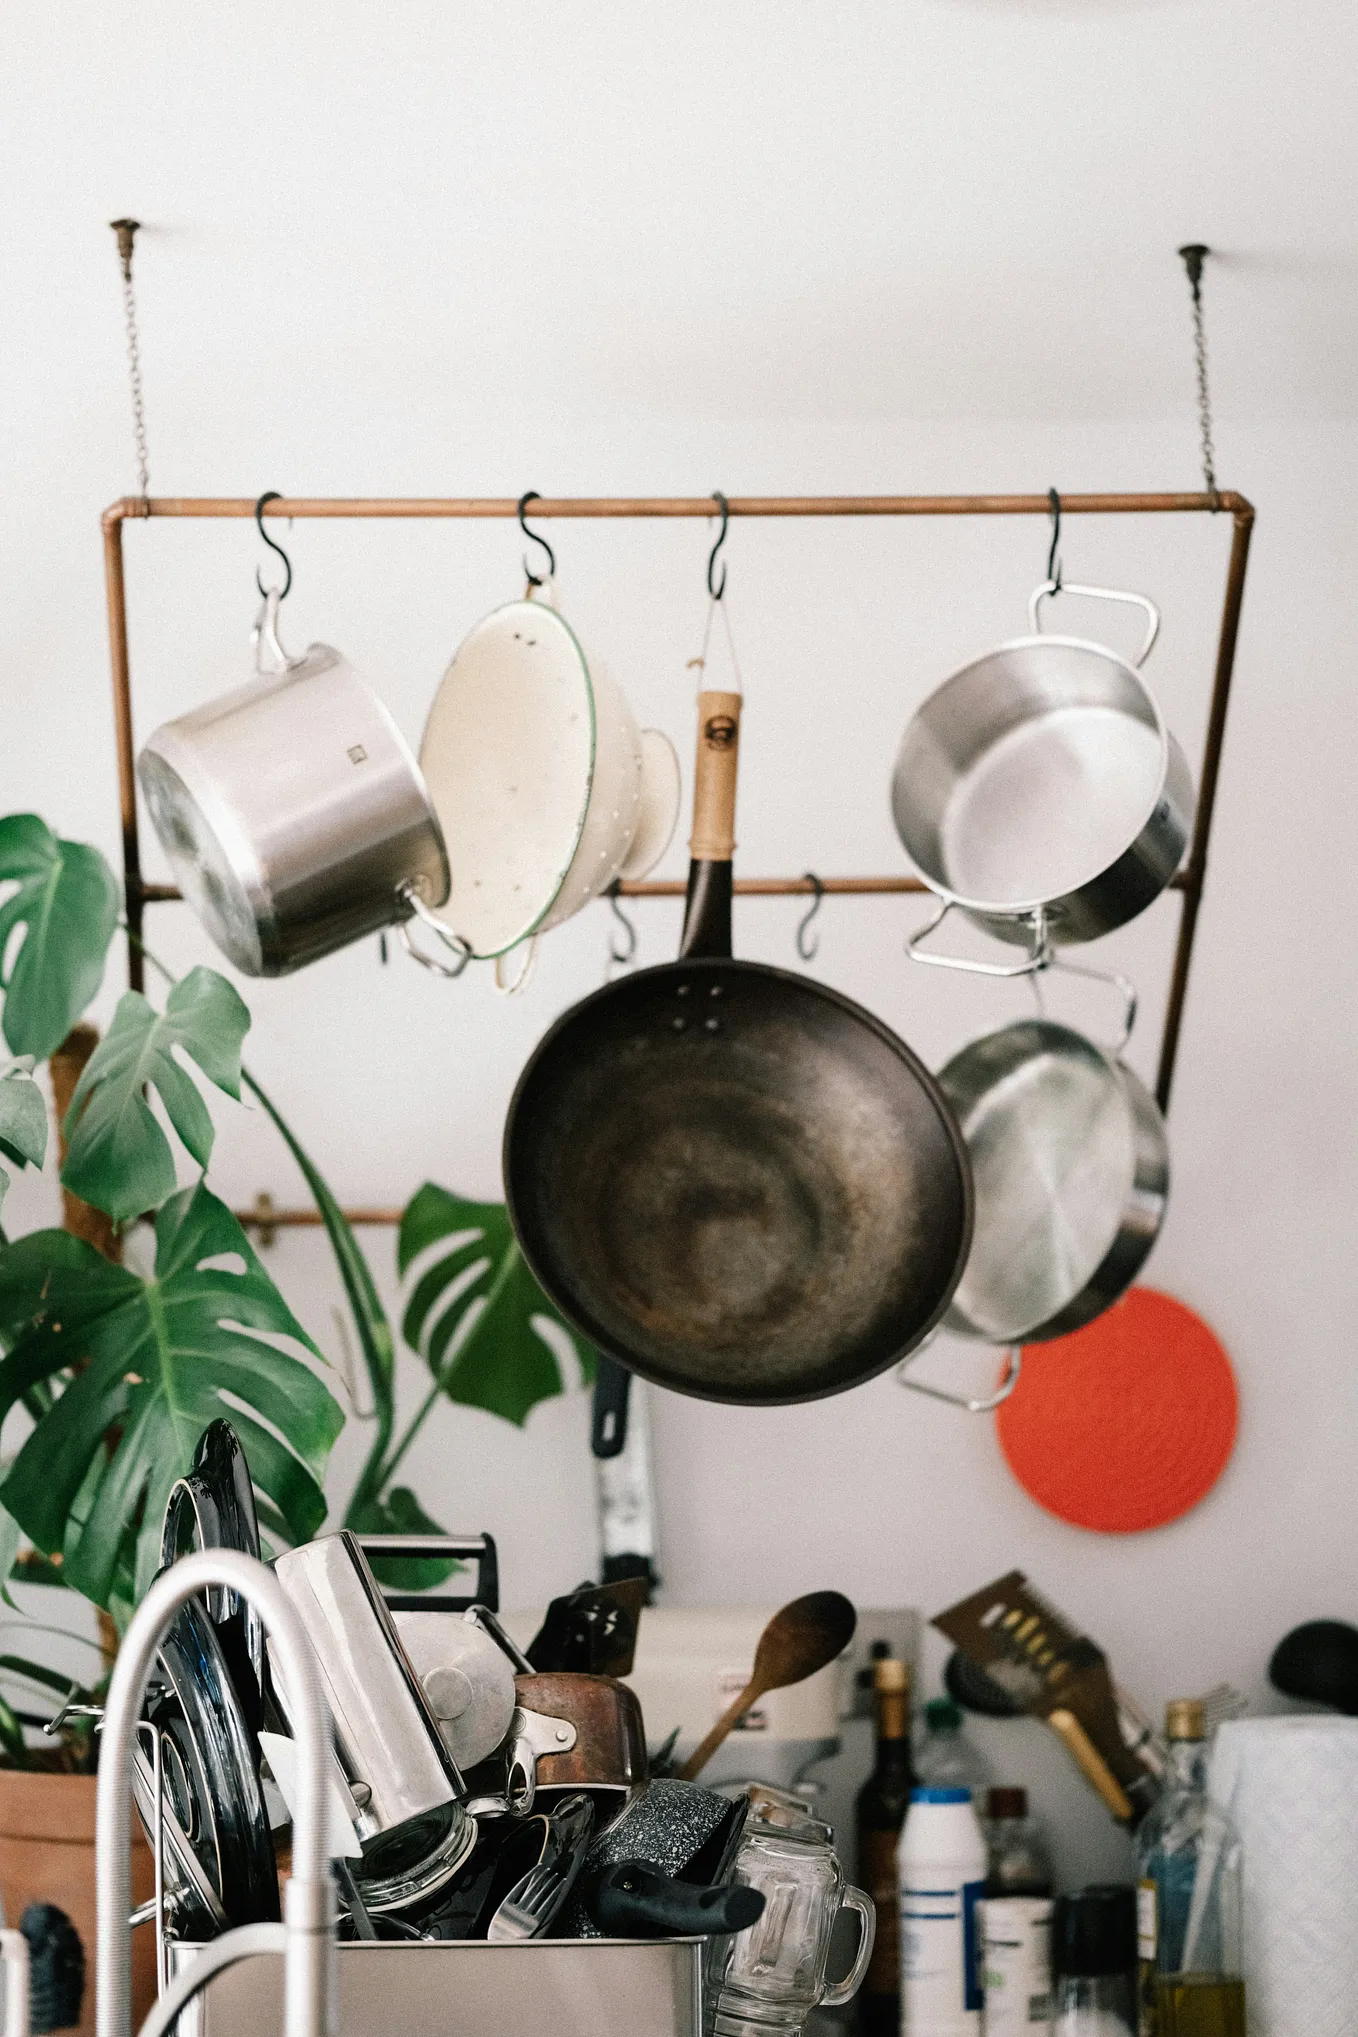 The kitchen implements symbolizes more than most things in the home the need for constant cleaning. Hopefully this hard work is shared amongst the family.